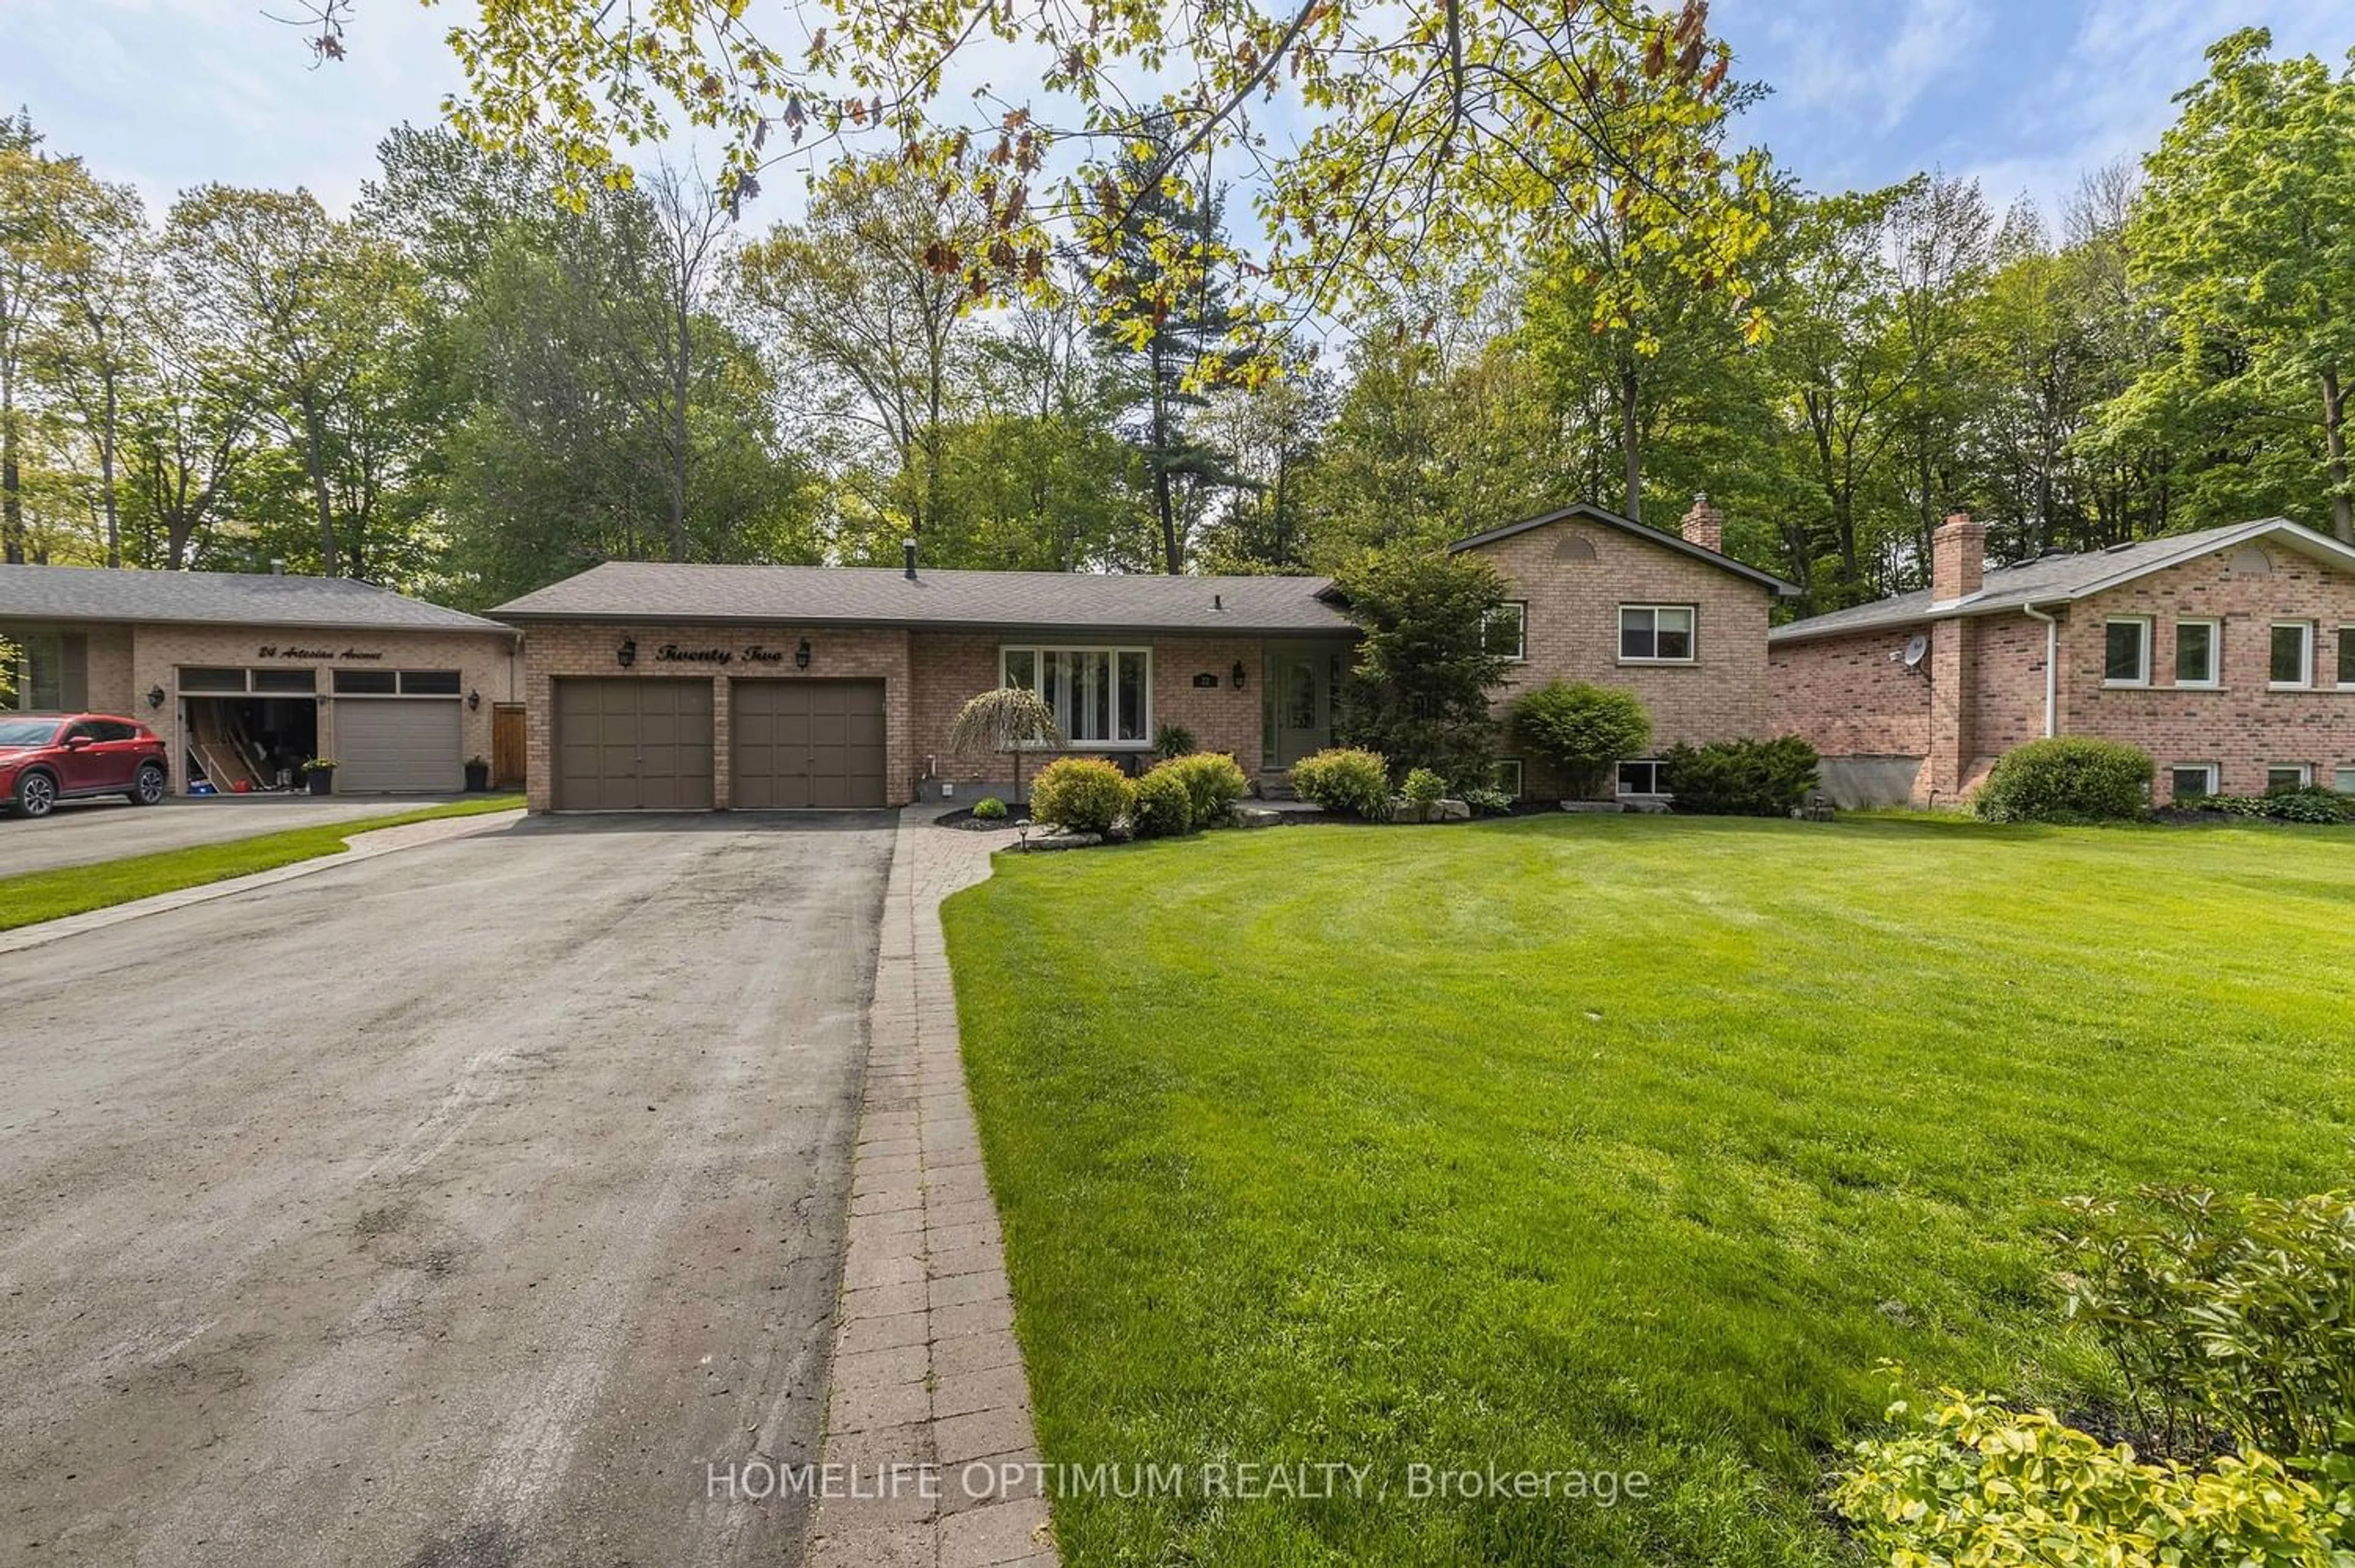 Frontside or backside of a home for 22 Artesian Ave, East Gwillimbury Ontario L9N 1J3